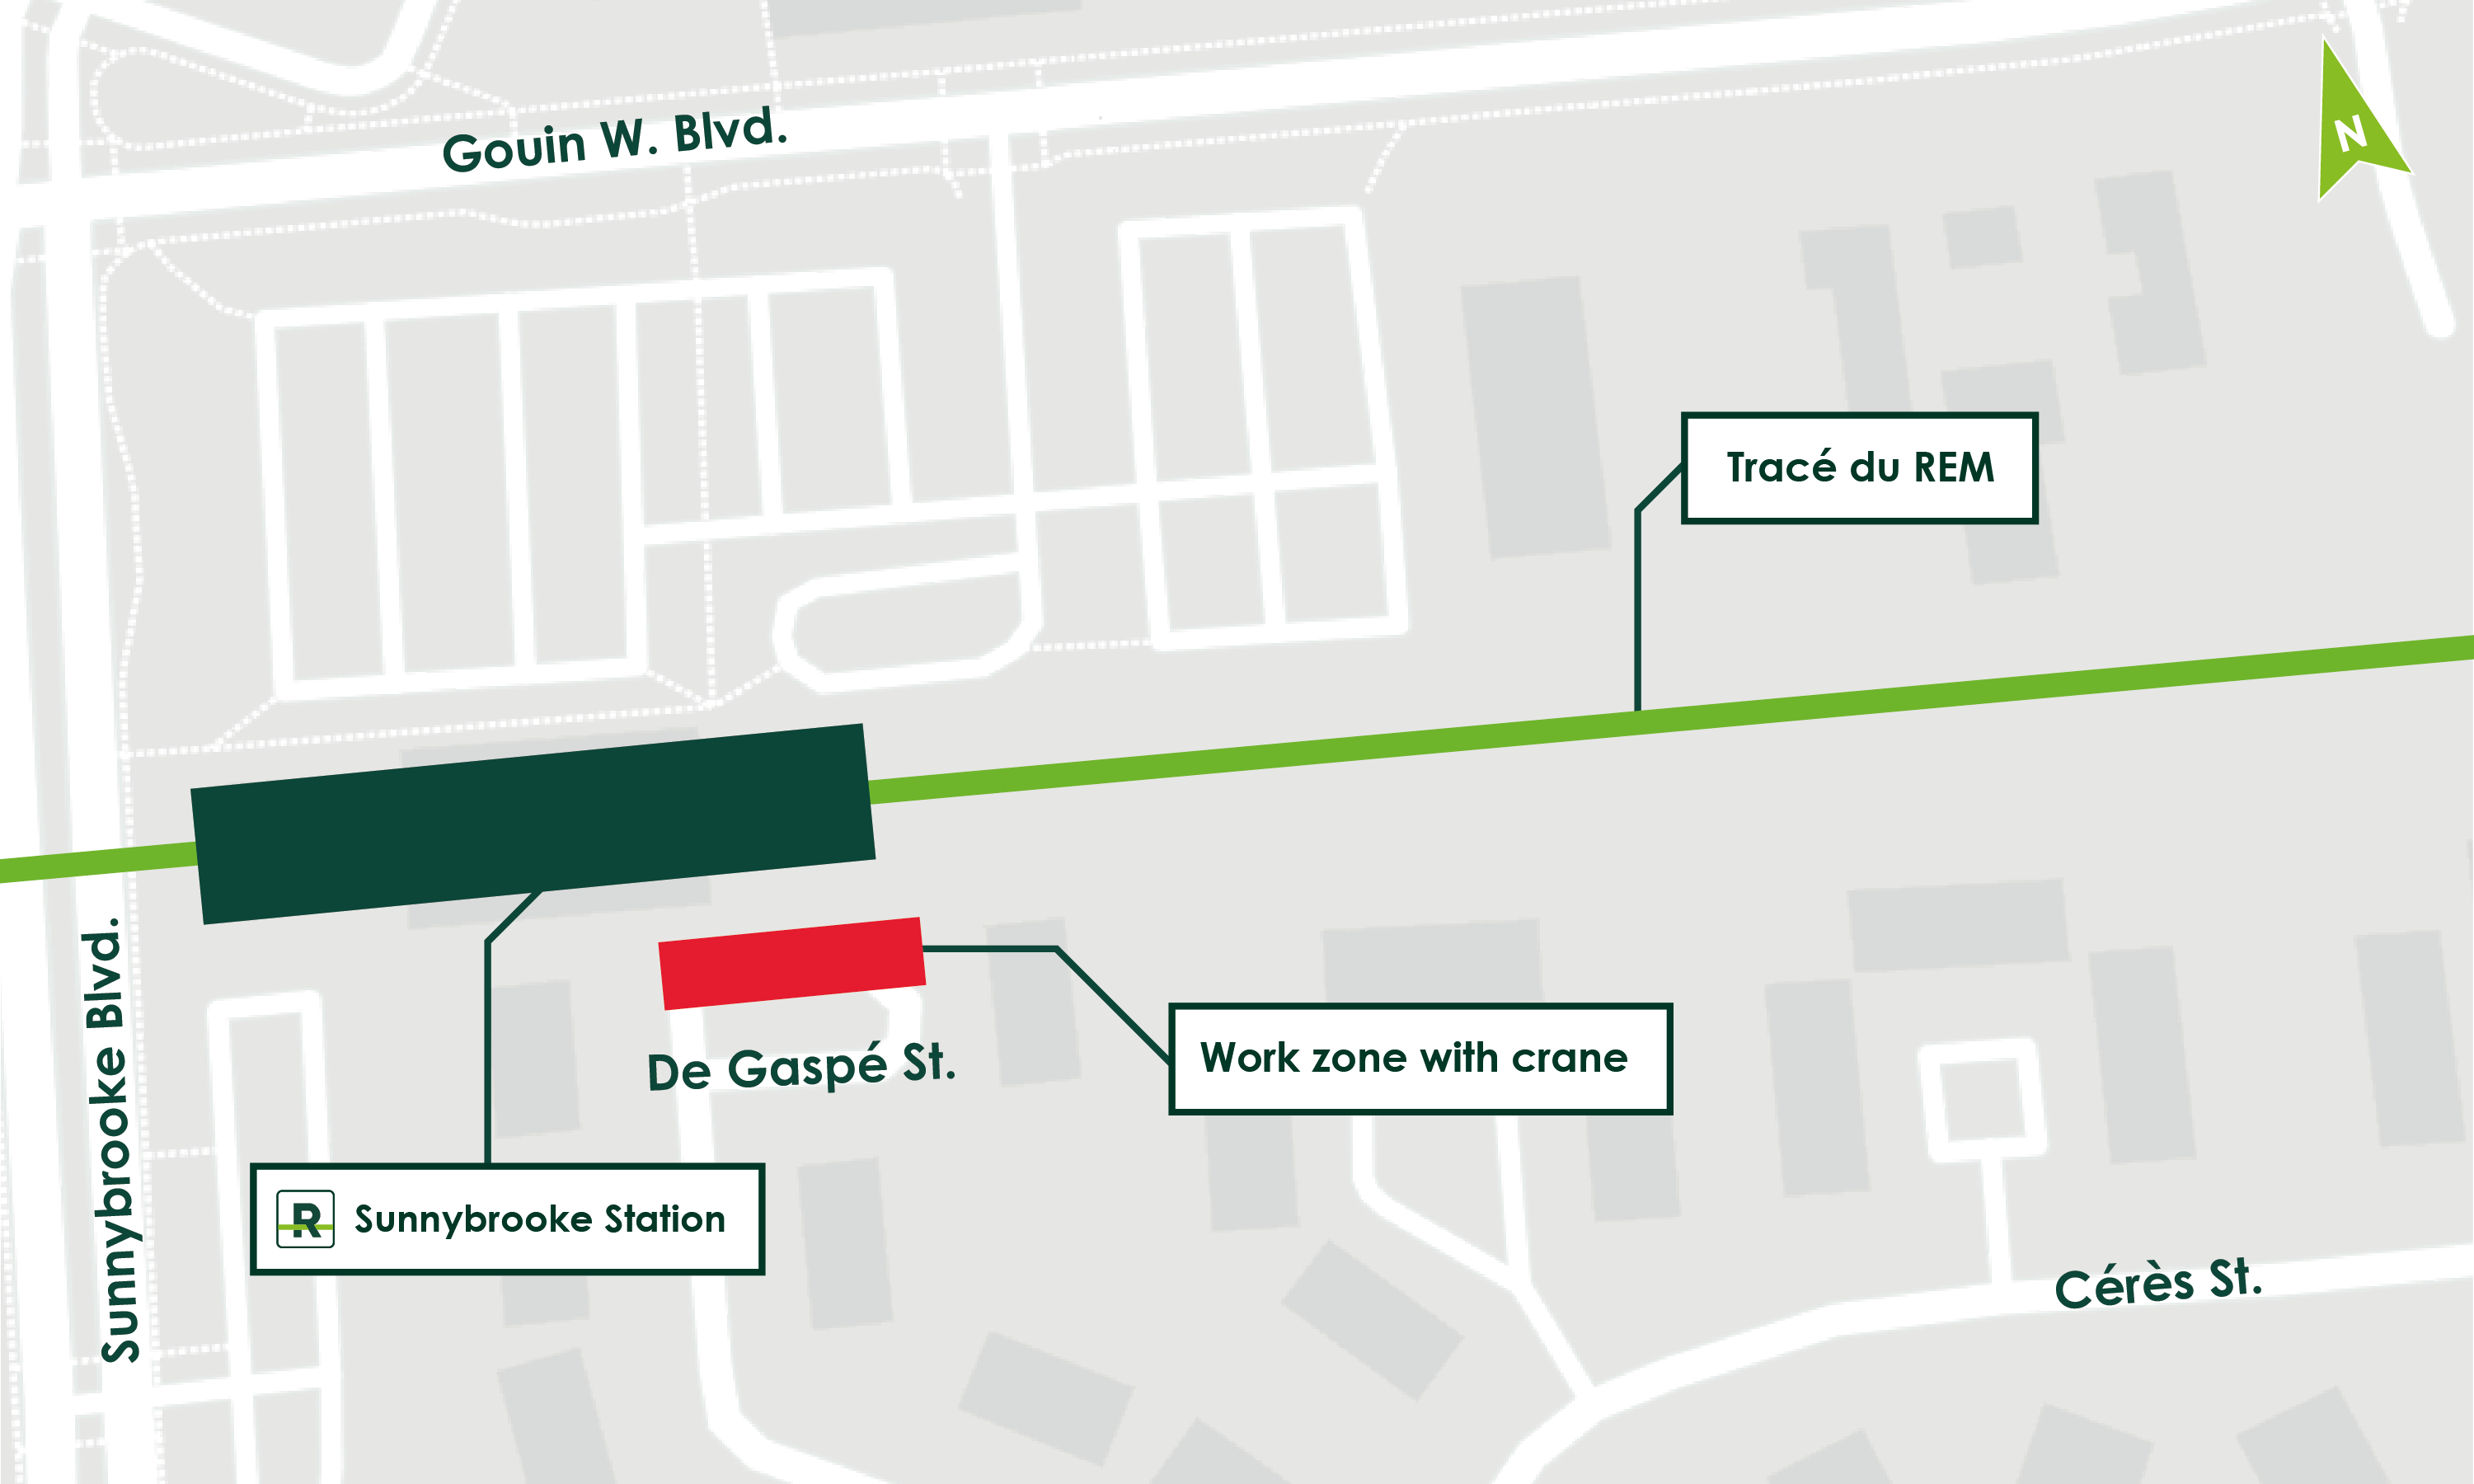 Indication of the construction zone, in red, in the round-about of De Gaspé Street